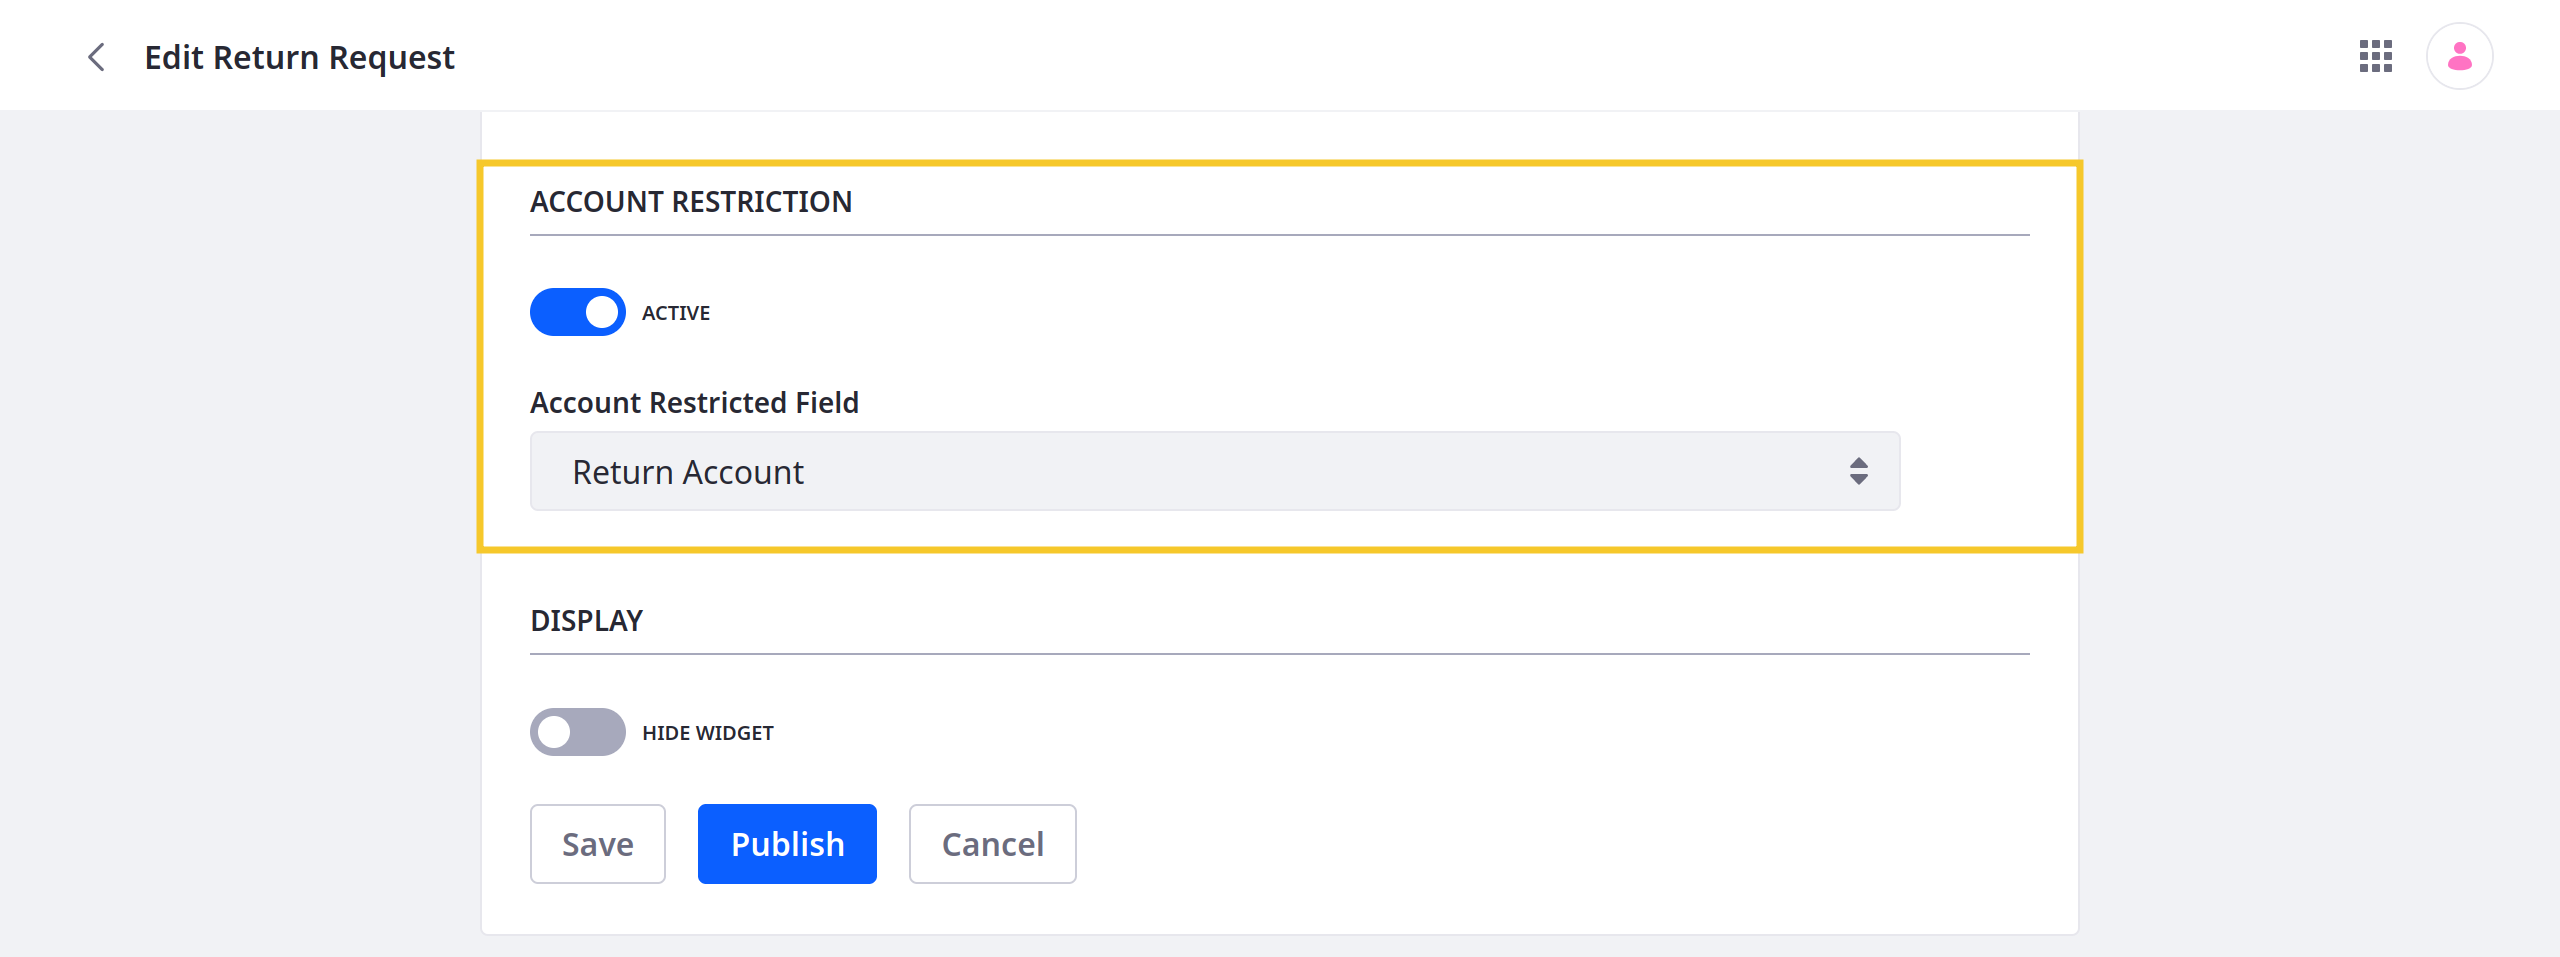 Toggle Account Restriction to active and select the account relationship you want to use.